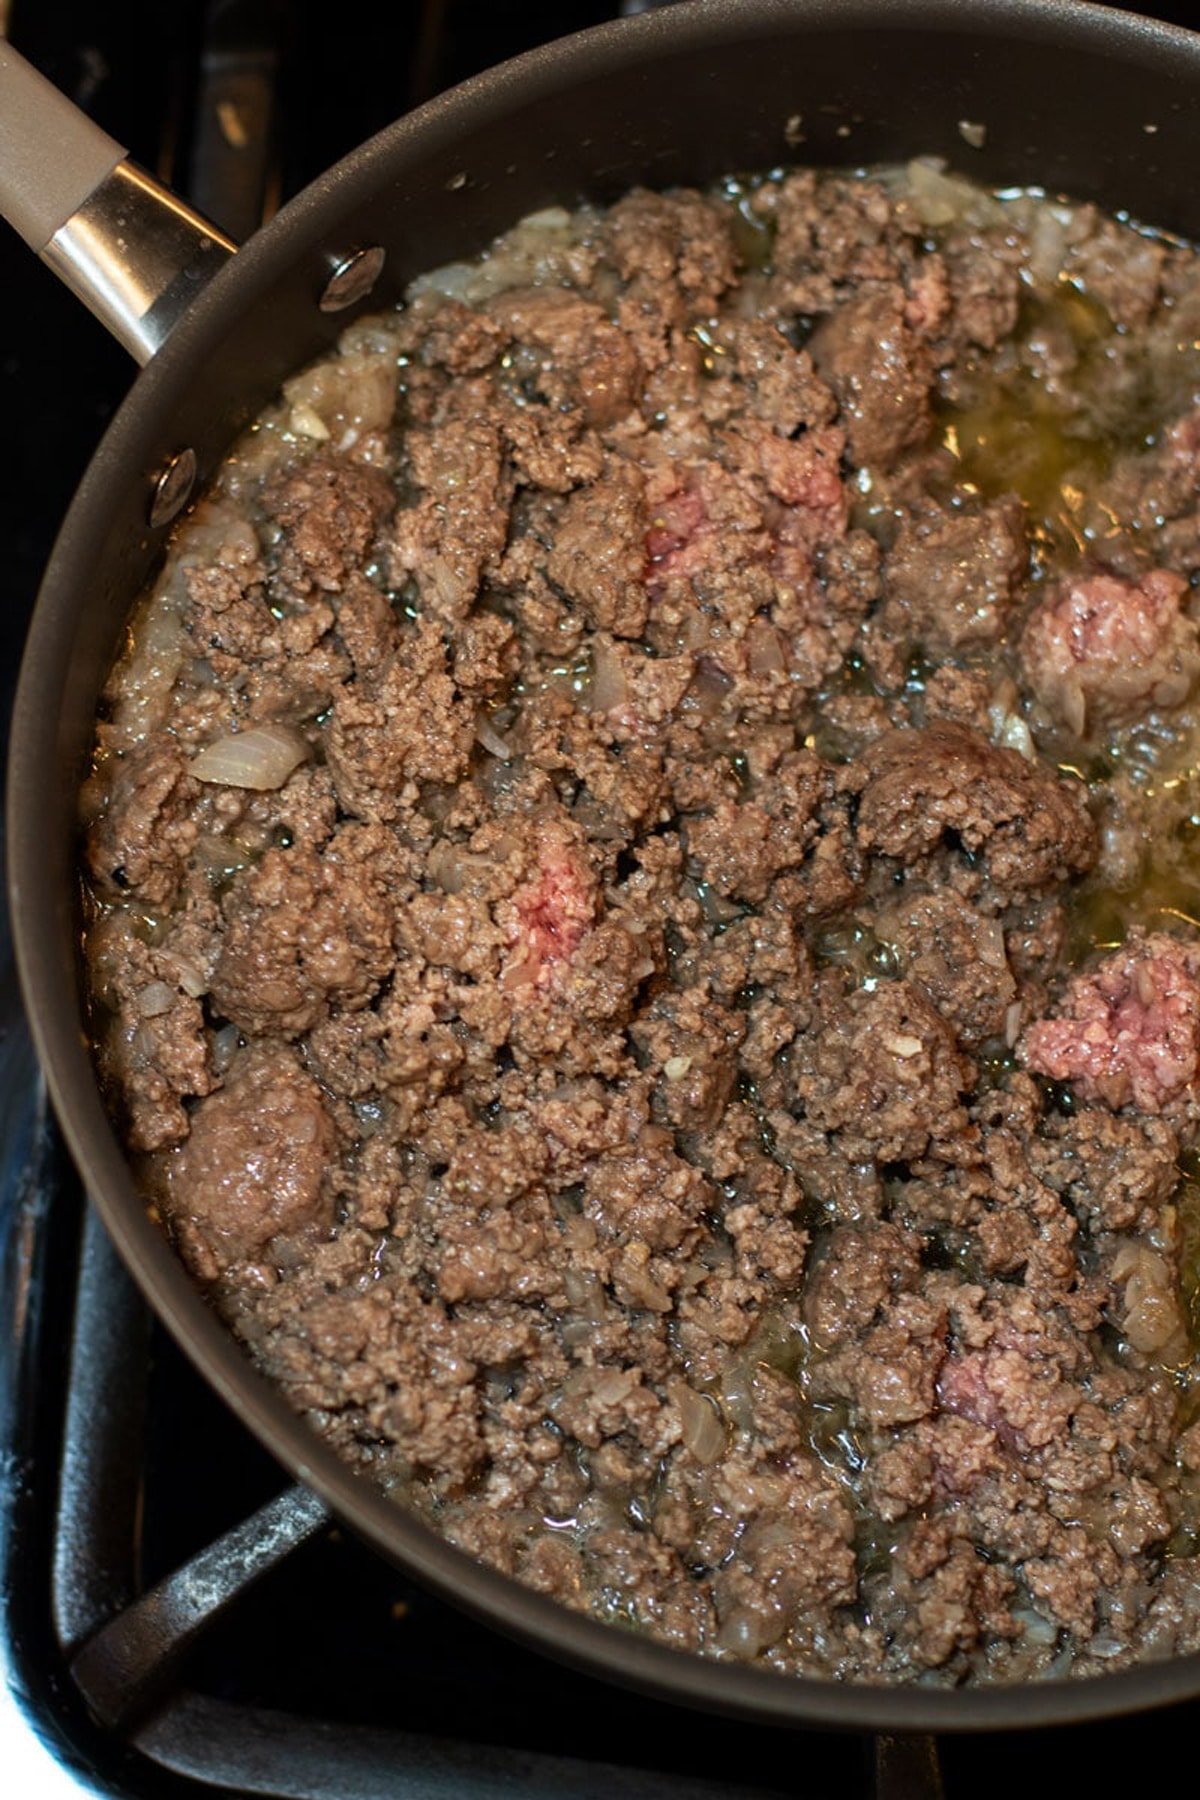 Ground beef browning in a skillet.